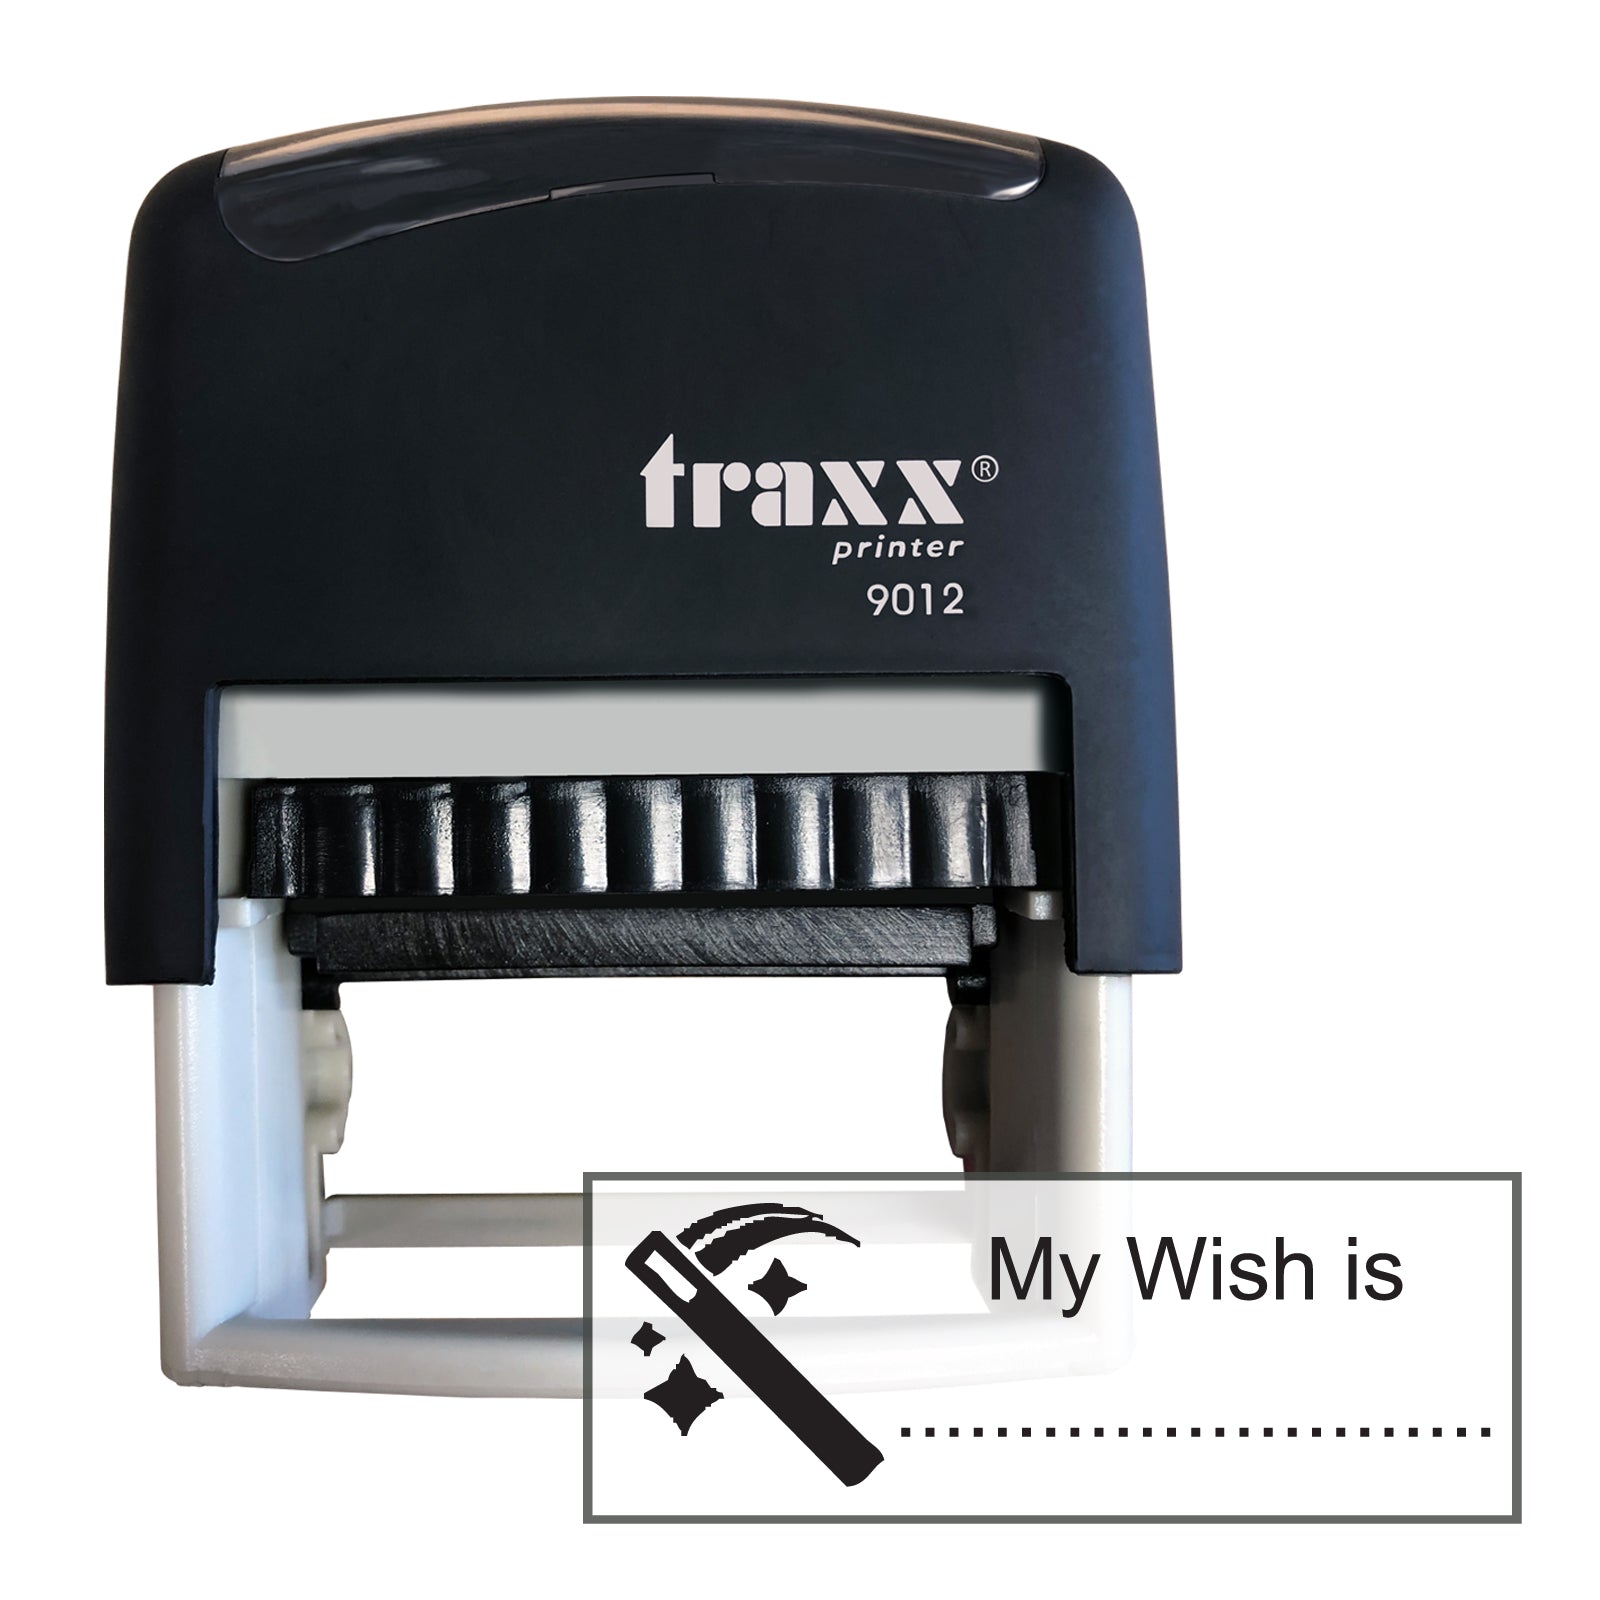 Traxx 9012 48 x 18mm Assessment Stamp - My Wish is